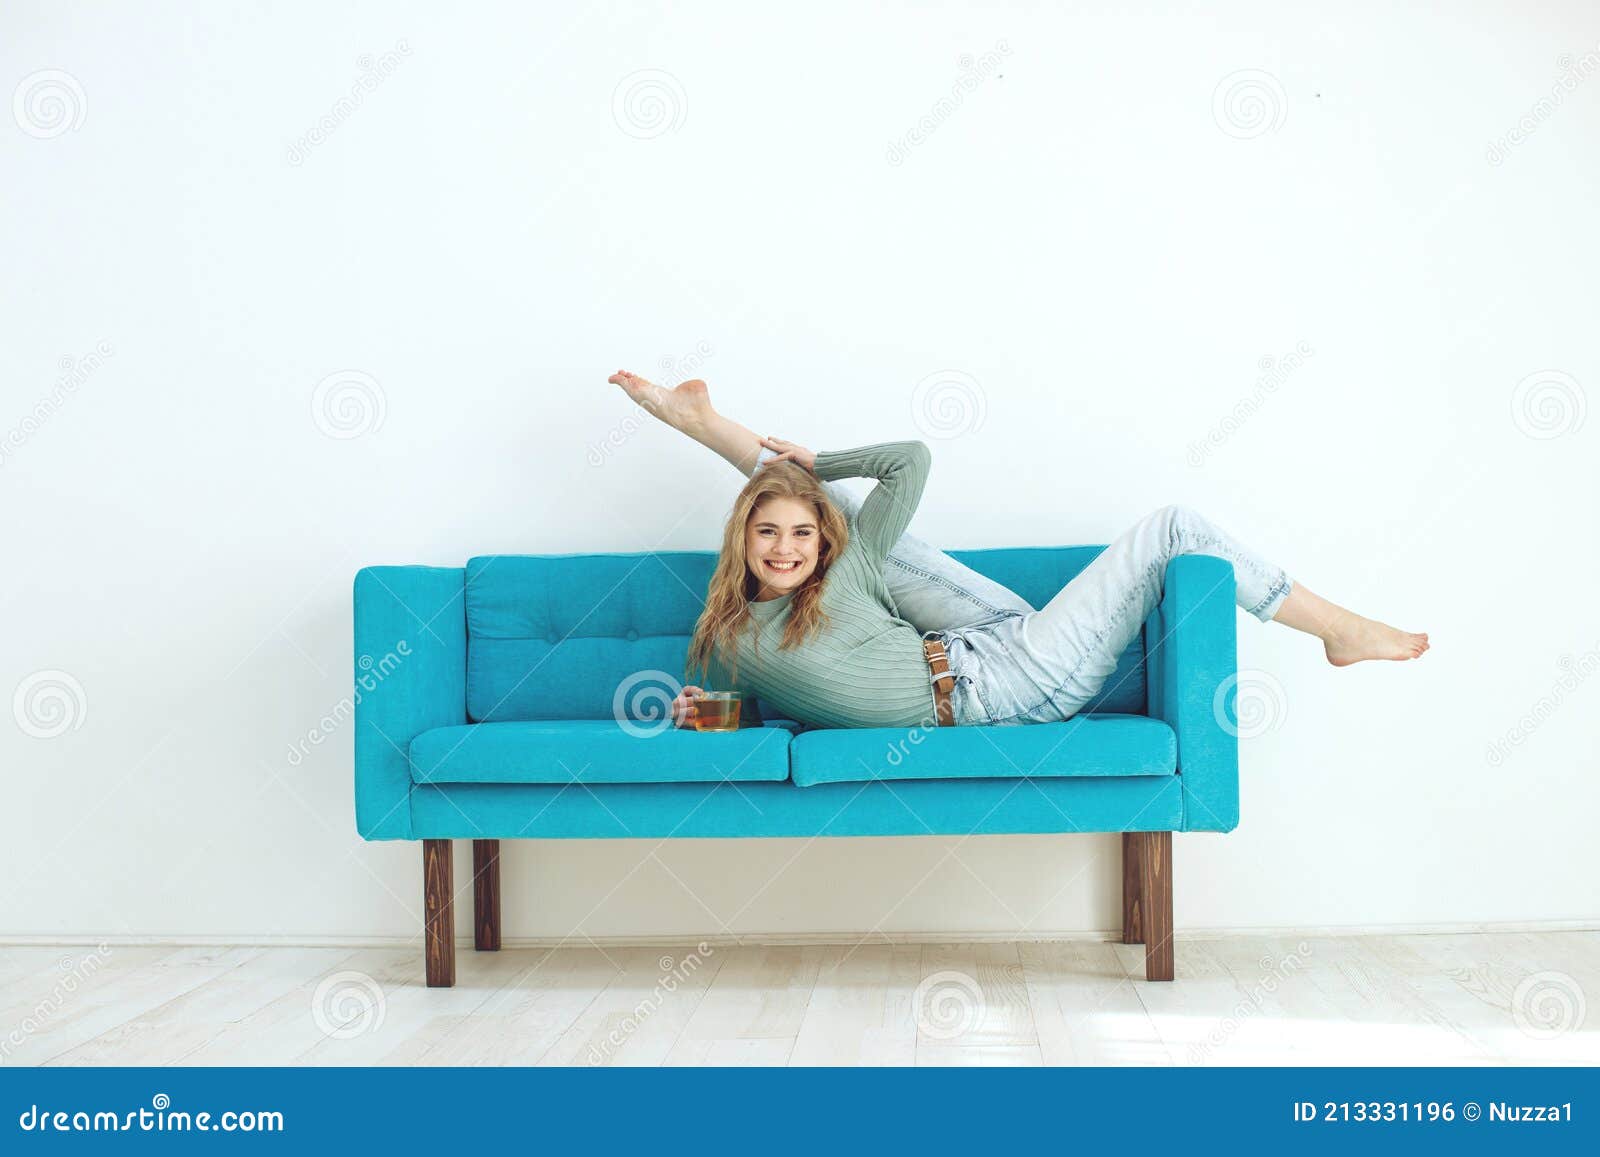 Beautiful Woman is Drinking Tea on the Sofa at Home. Sportive Young Girl  Doing Yoga Pose on the Couch Stock Photo - Image of cozy, comfort: 213331196